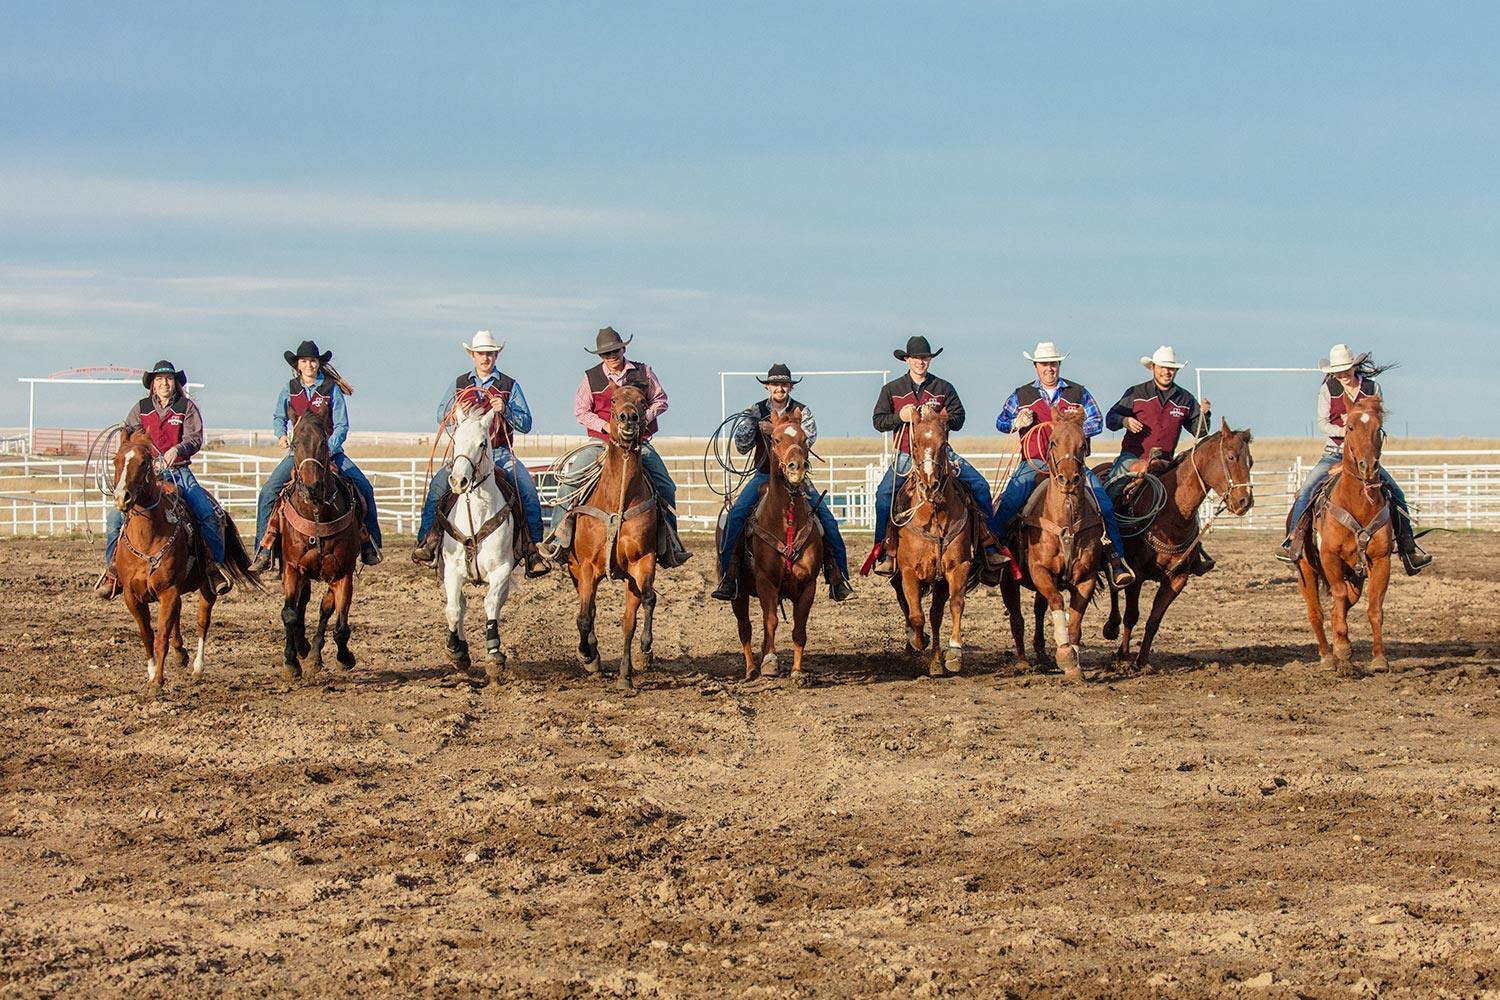 Members of the MSU-Northern rodeo team ride their horses together inside the rodeo ring at Box Elder, Montana.&nbsp;→ License Photo